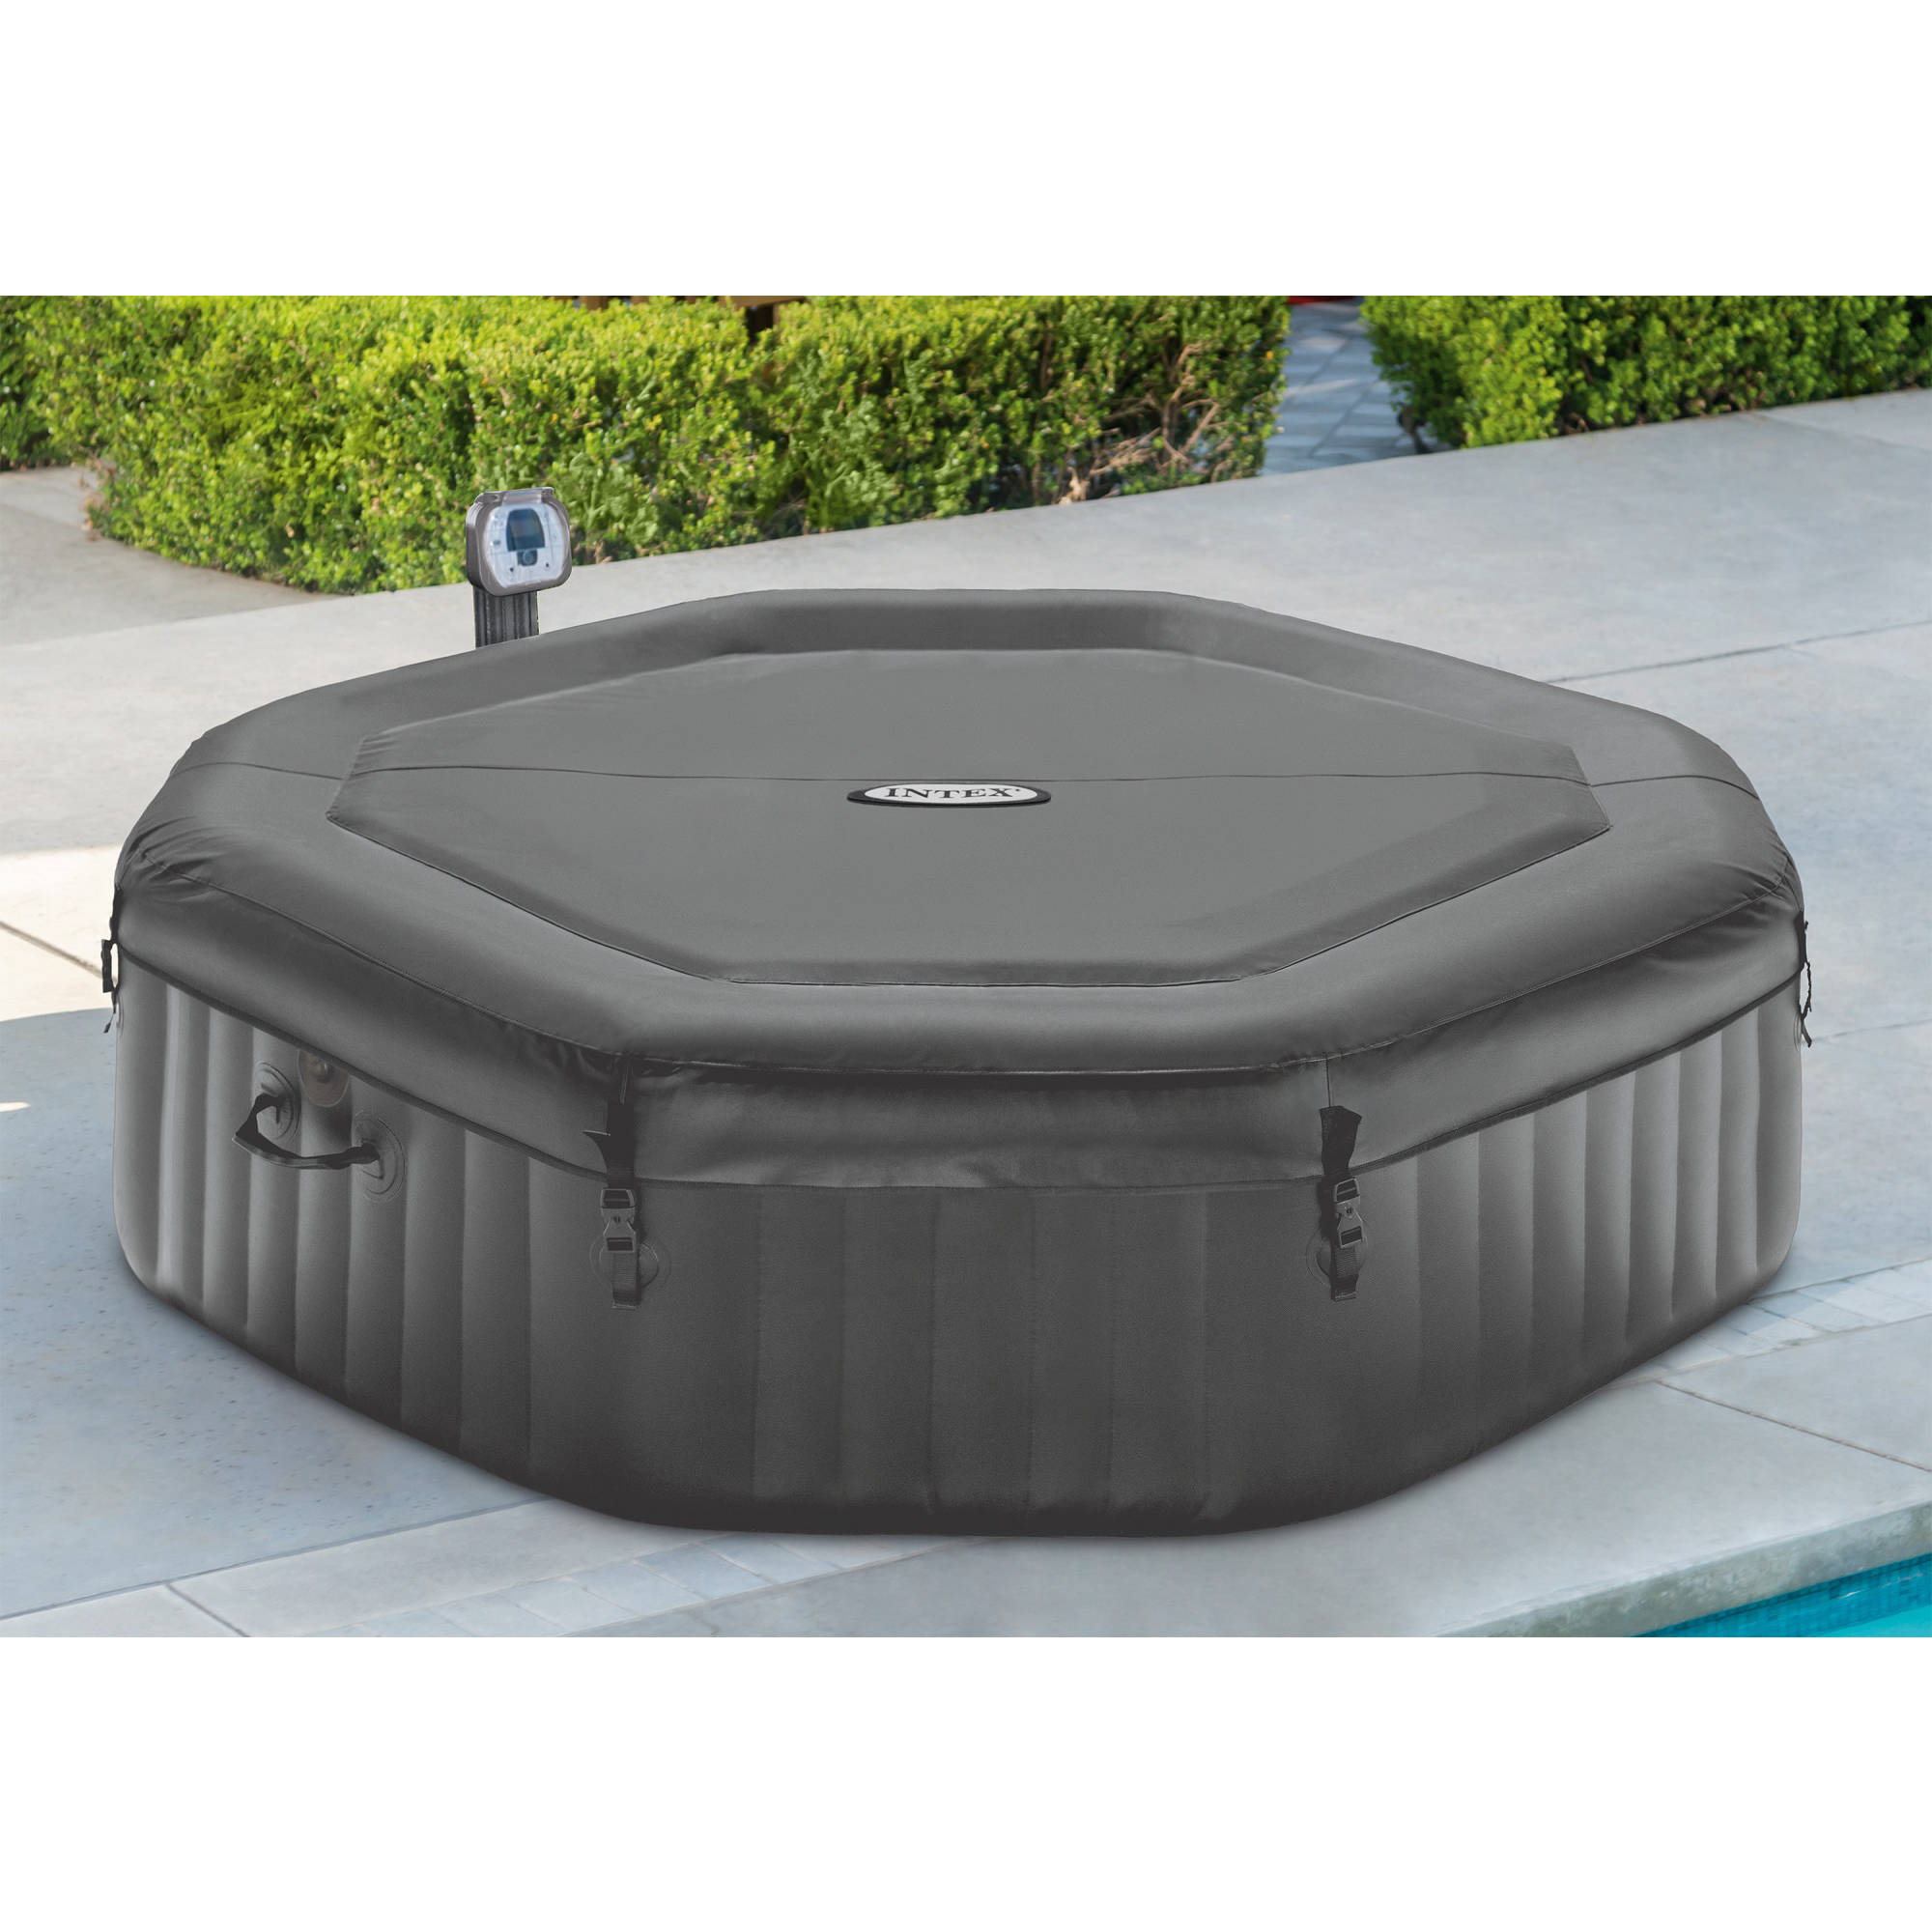 Intex 140 Bubble Jets 6-Person Octagonal Portable Inflatable Hot Tub Spa - image 3 of 7